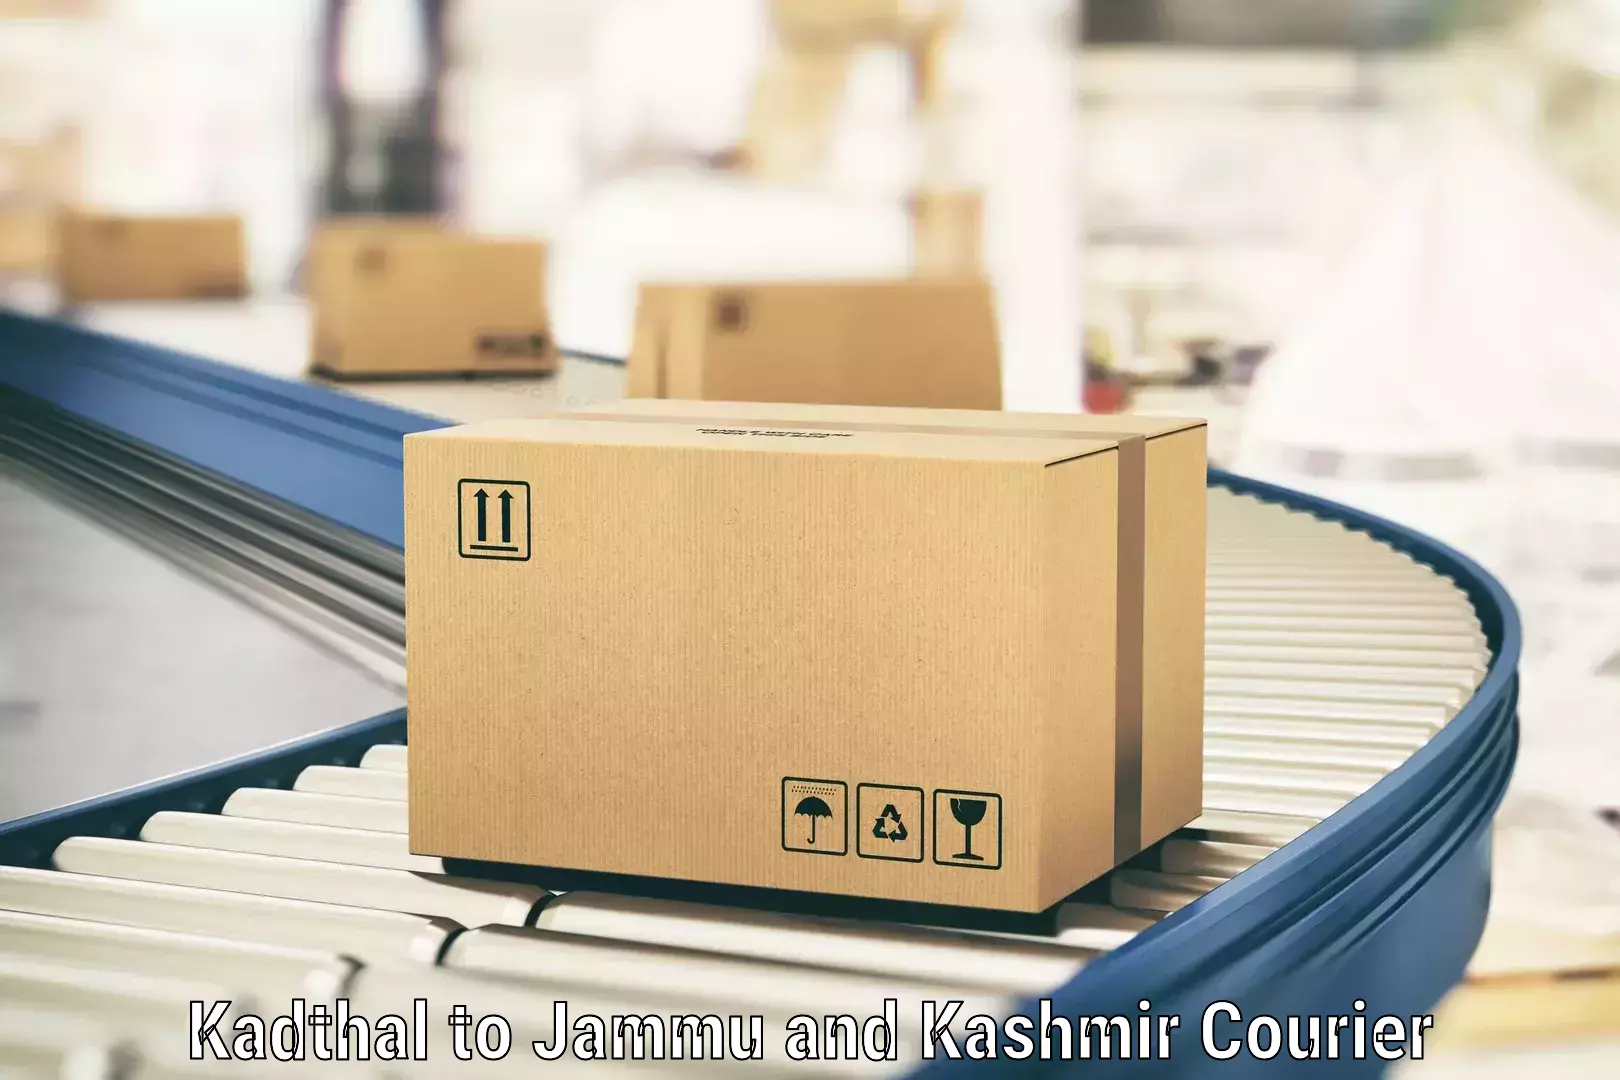 Optimized shipping routes Kadthal to Poonch